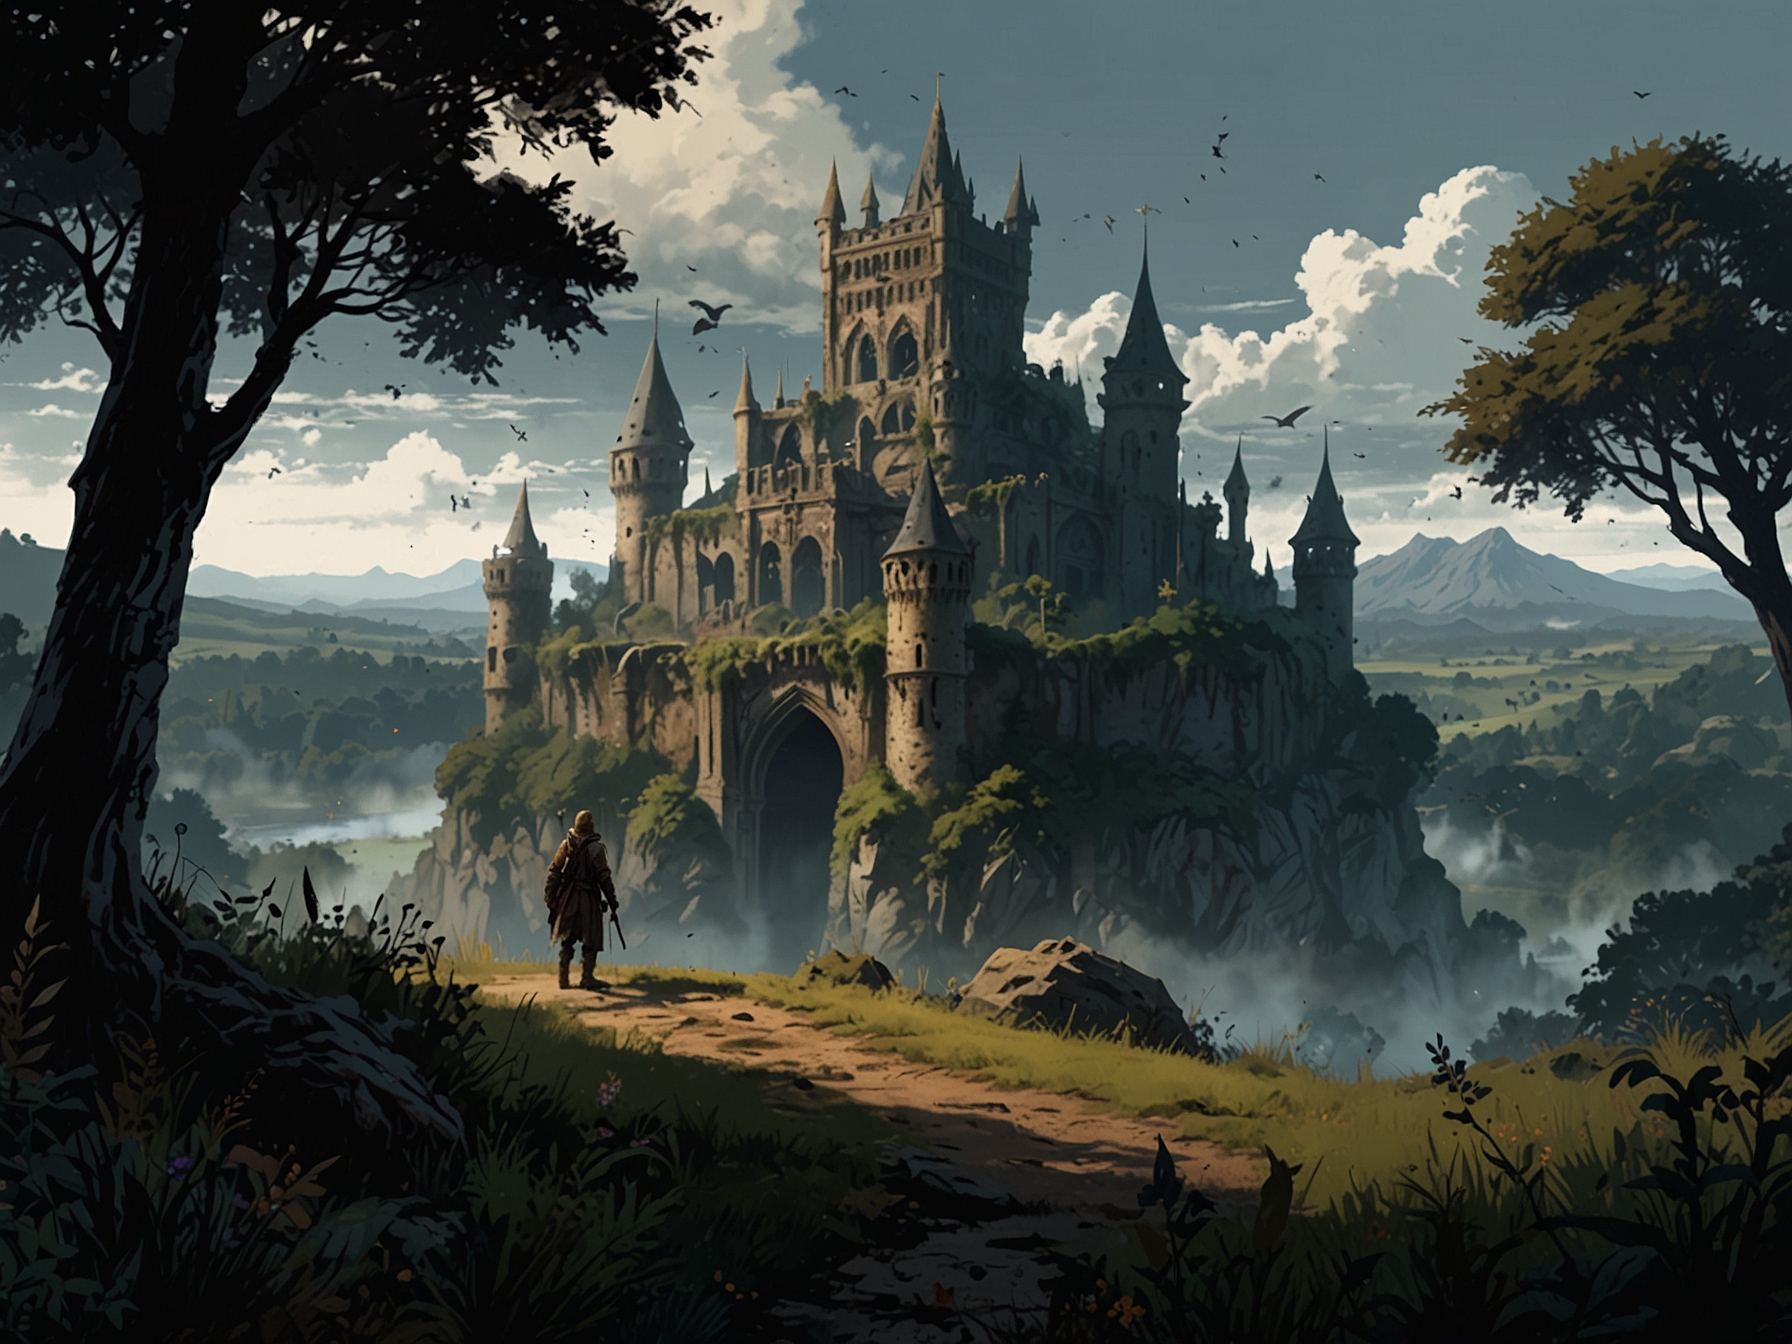 An illustration of key characters and landscapes from Elden Ring, showcasing the game's rich lore and expansive world, hinting at its potential as a TV series or film.